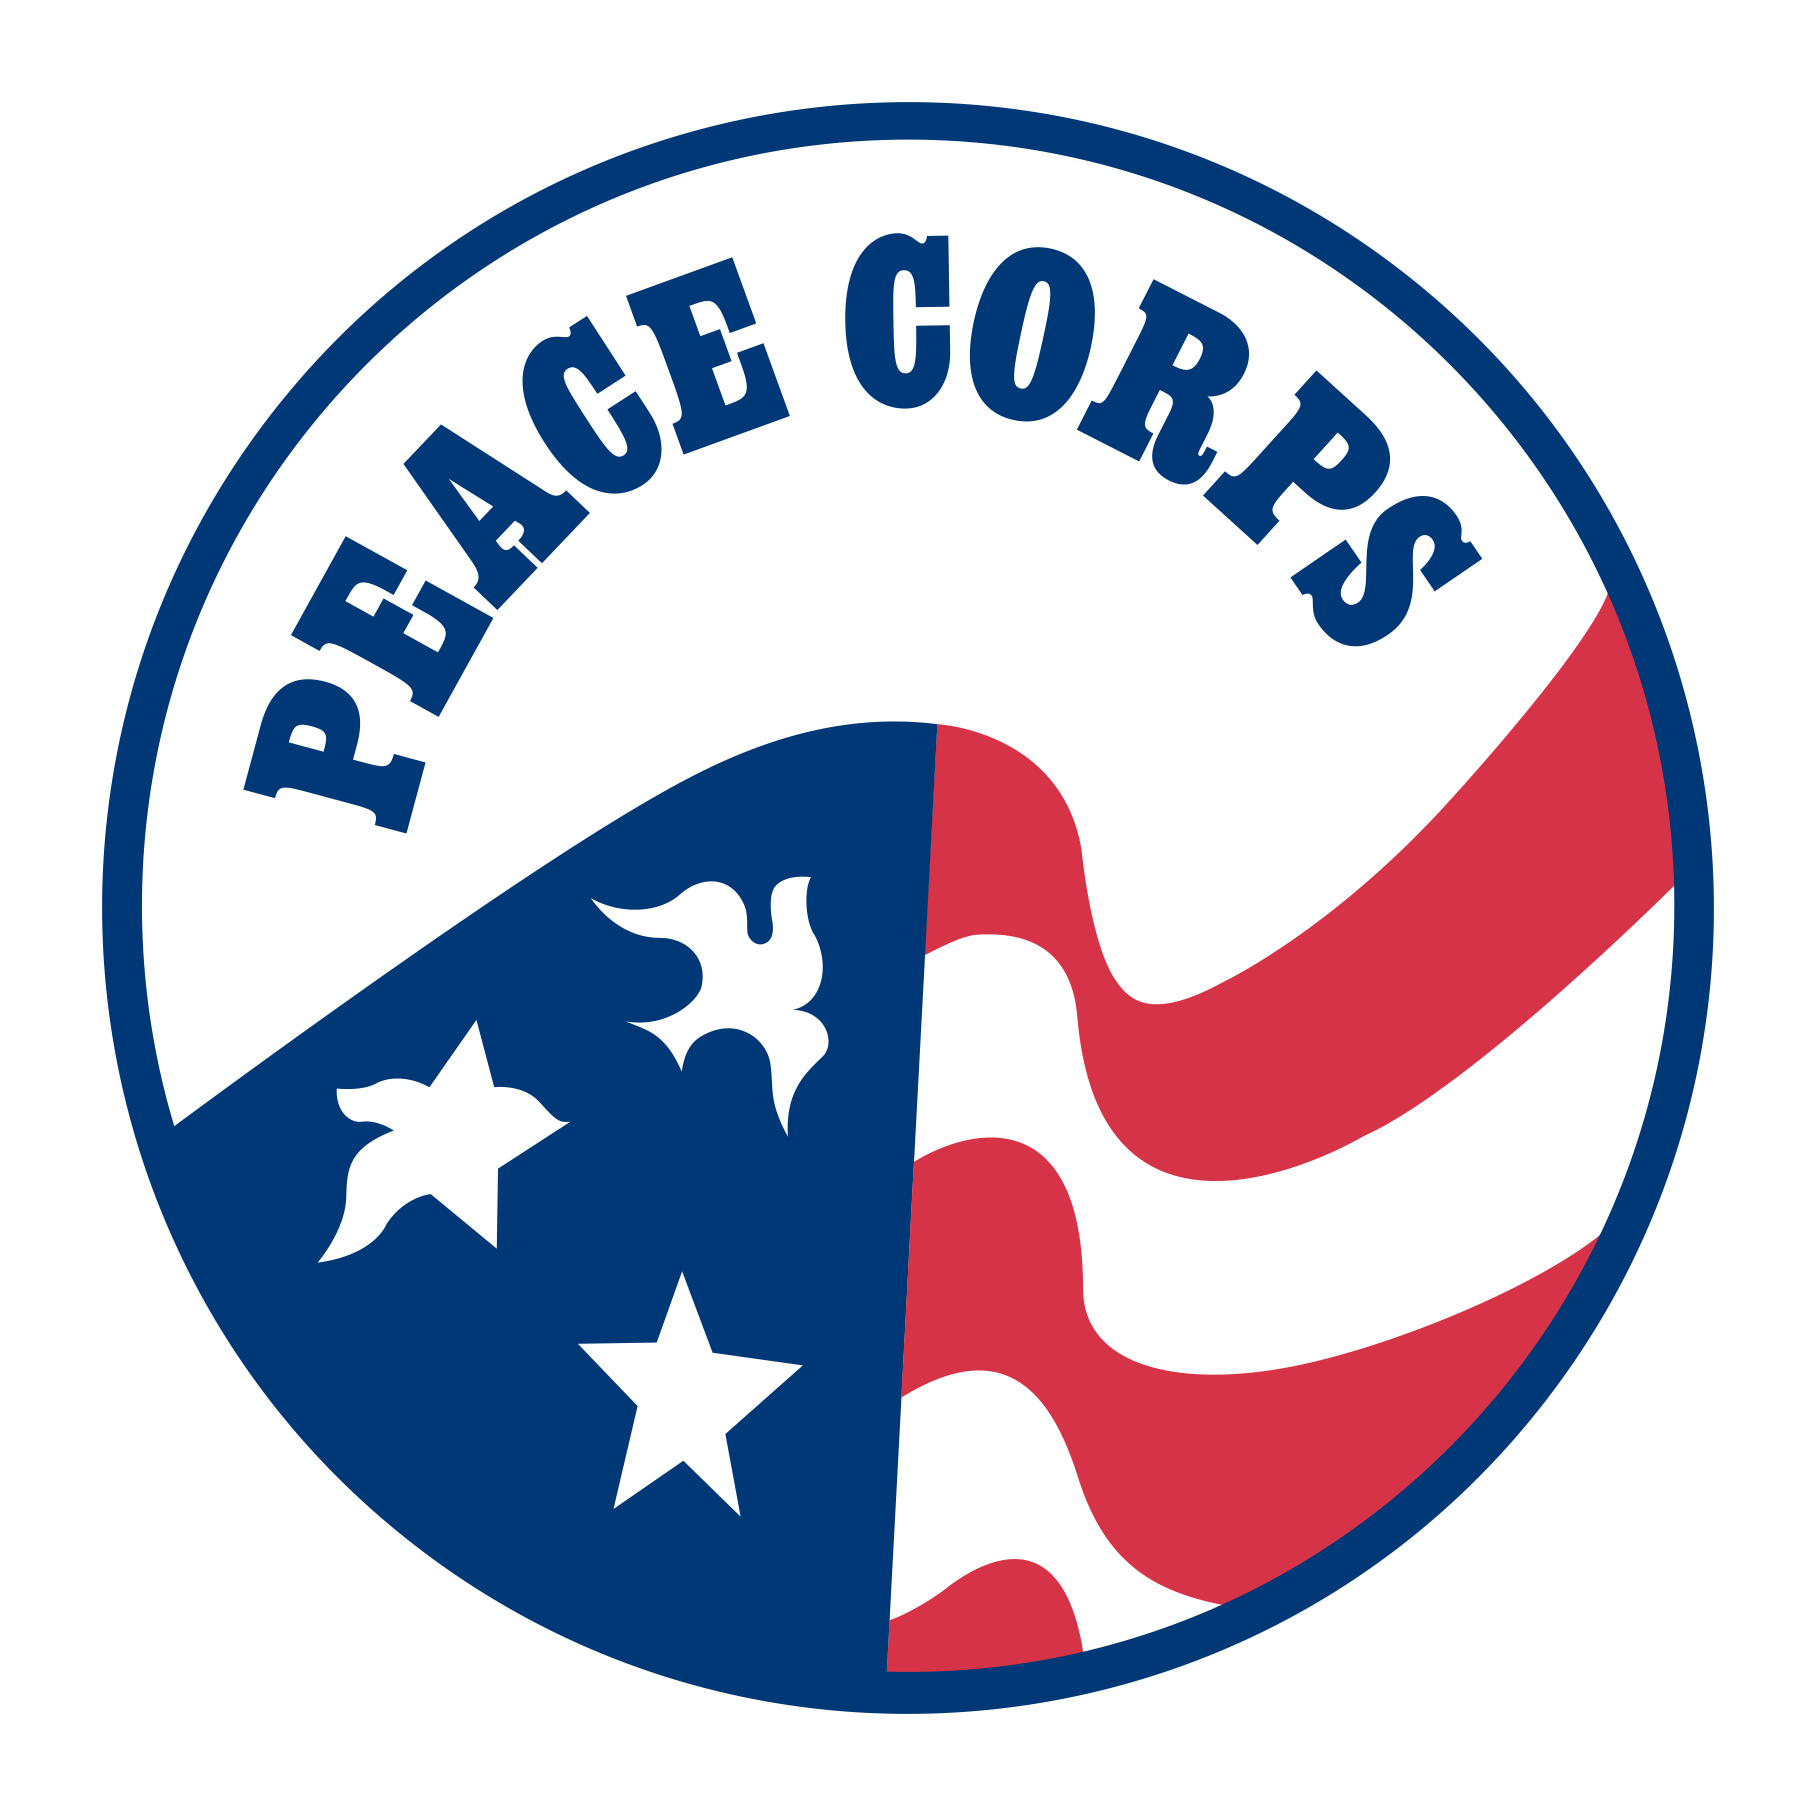 Visit http://www.peacecorps.gov/